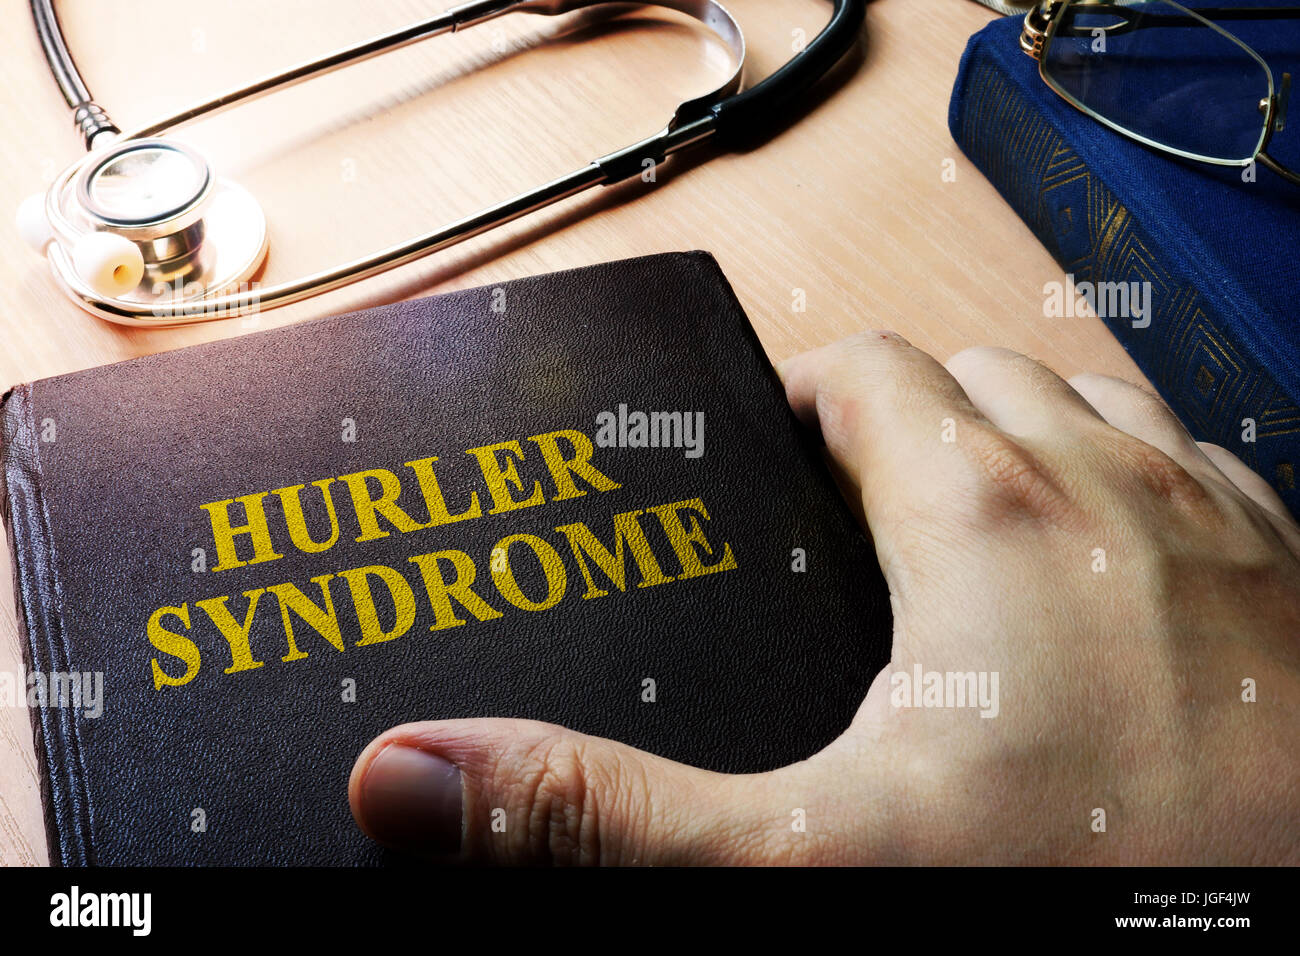 Hands holding book Hurler syndrome. Stock Photo